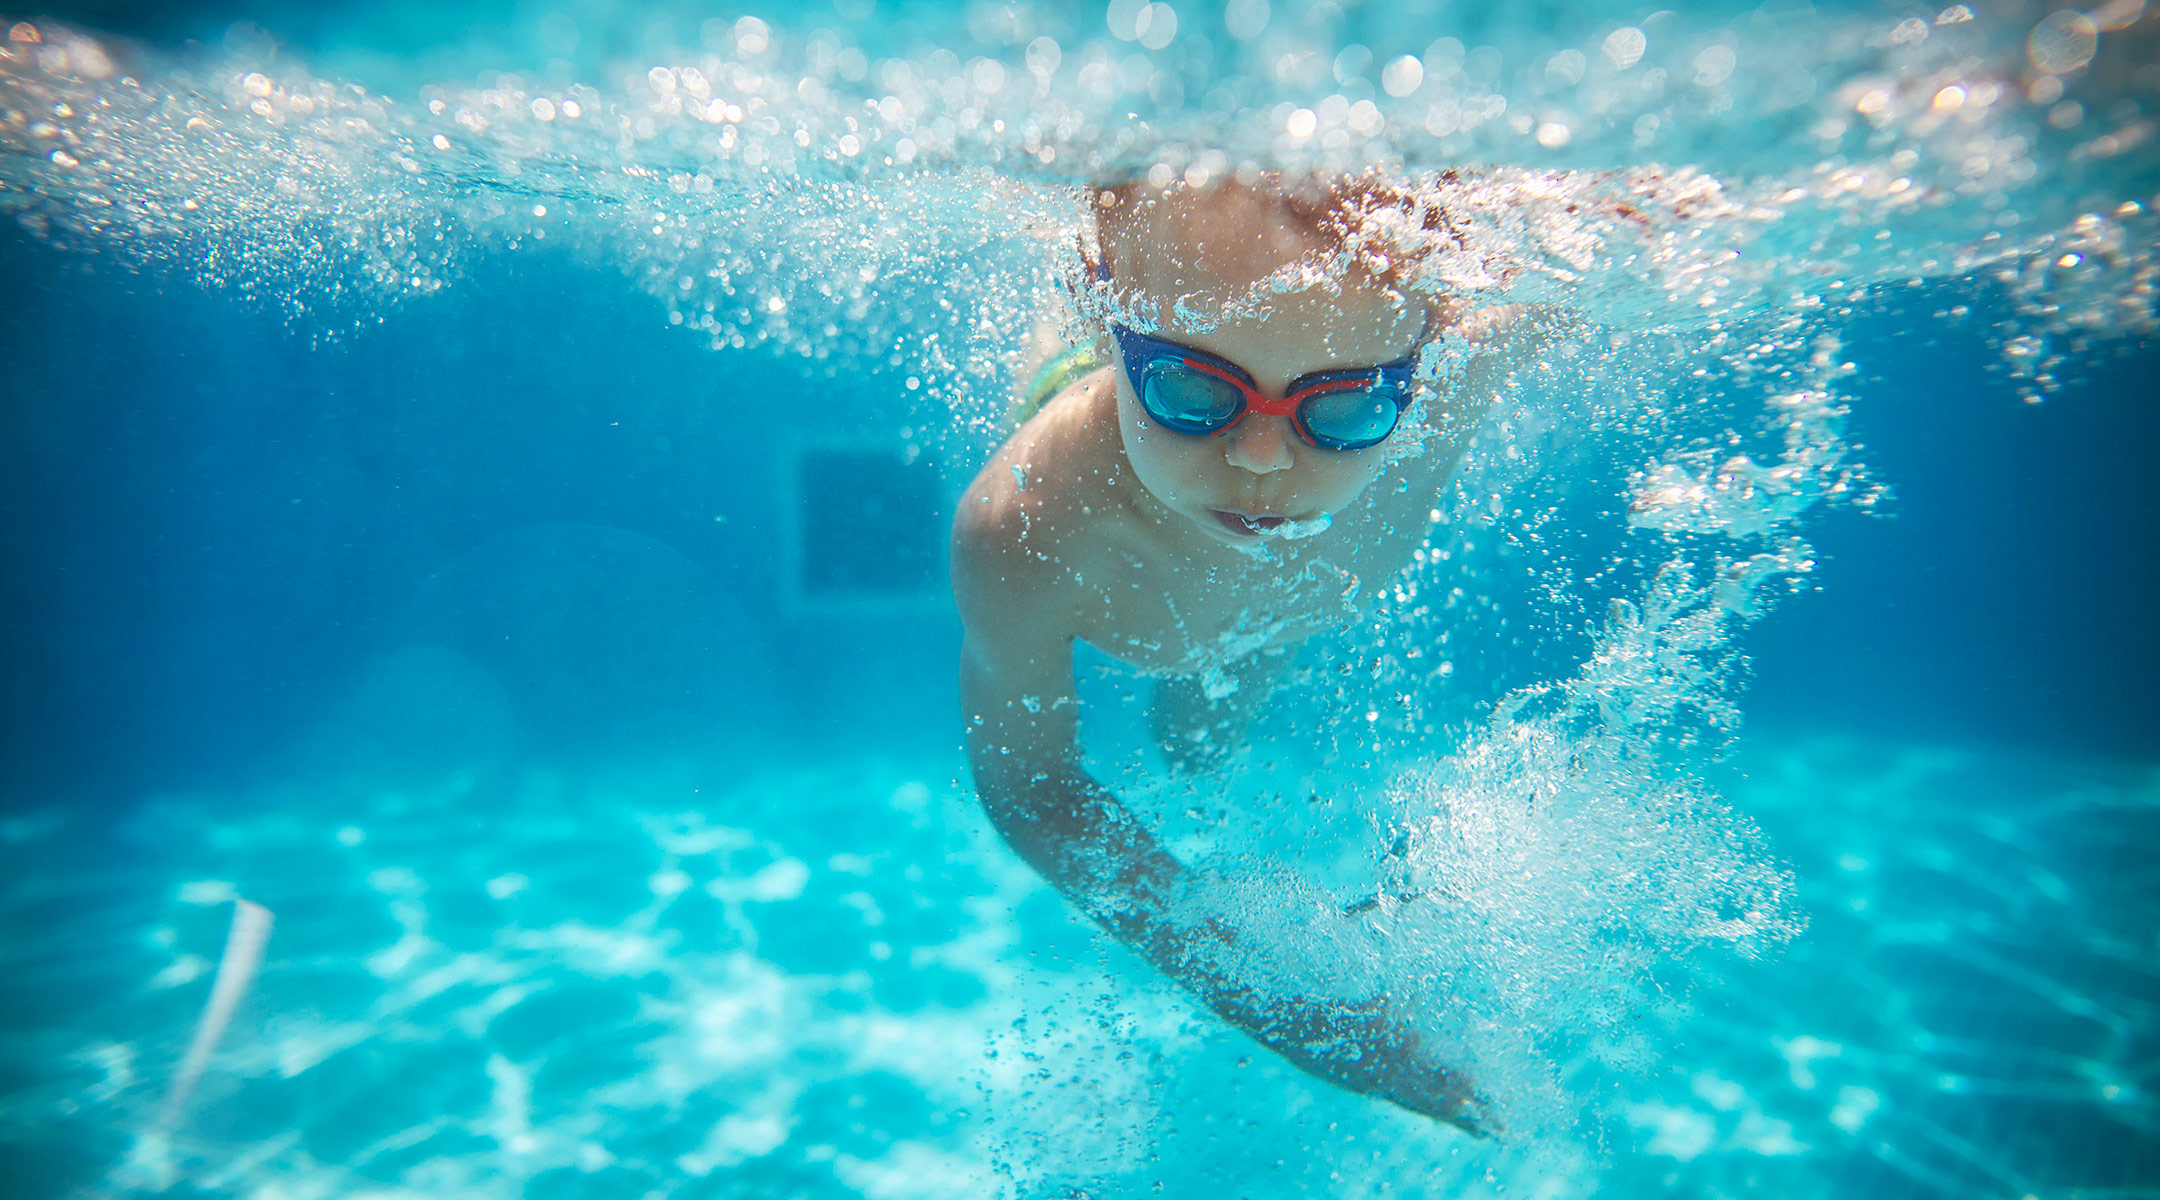 young child swimming in pool underwater